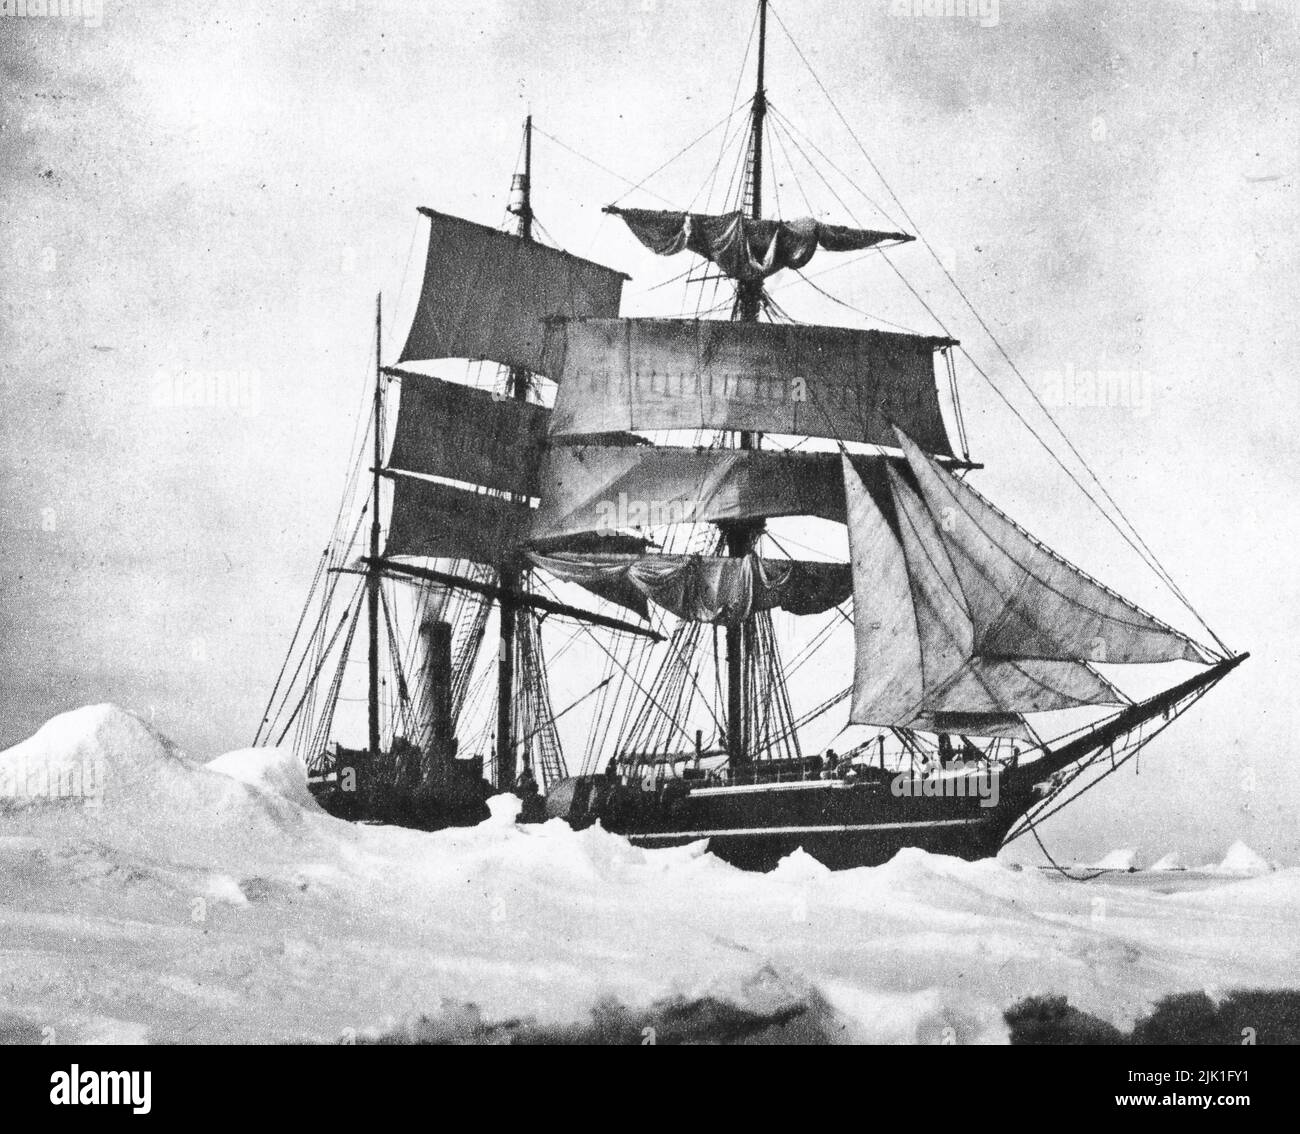 Terra Nova, Captive in Heavy Pack, 1910. By Herbert Ponting (1870-1935). The Terra Nova Expedition (British Antarctic Expedition), was an expedition to Antarctica which took place between 1910 and 1913. Led by Captain Robert Falcon Scott (1868-1912), who wanted to be the first to reach the geographic South Pole. He and four others attained the pole on 17th January 1912, where they found that a Norwegian team led by Roald Amundsen (1872-1928) had preceded them. Scott's party of five died on the return journey from the pole. Stock Photo